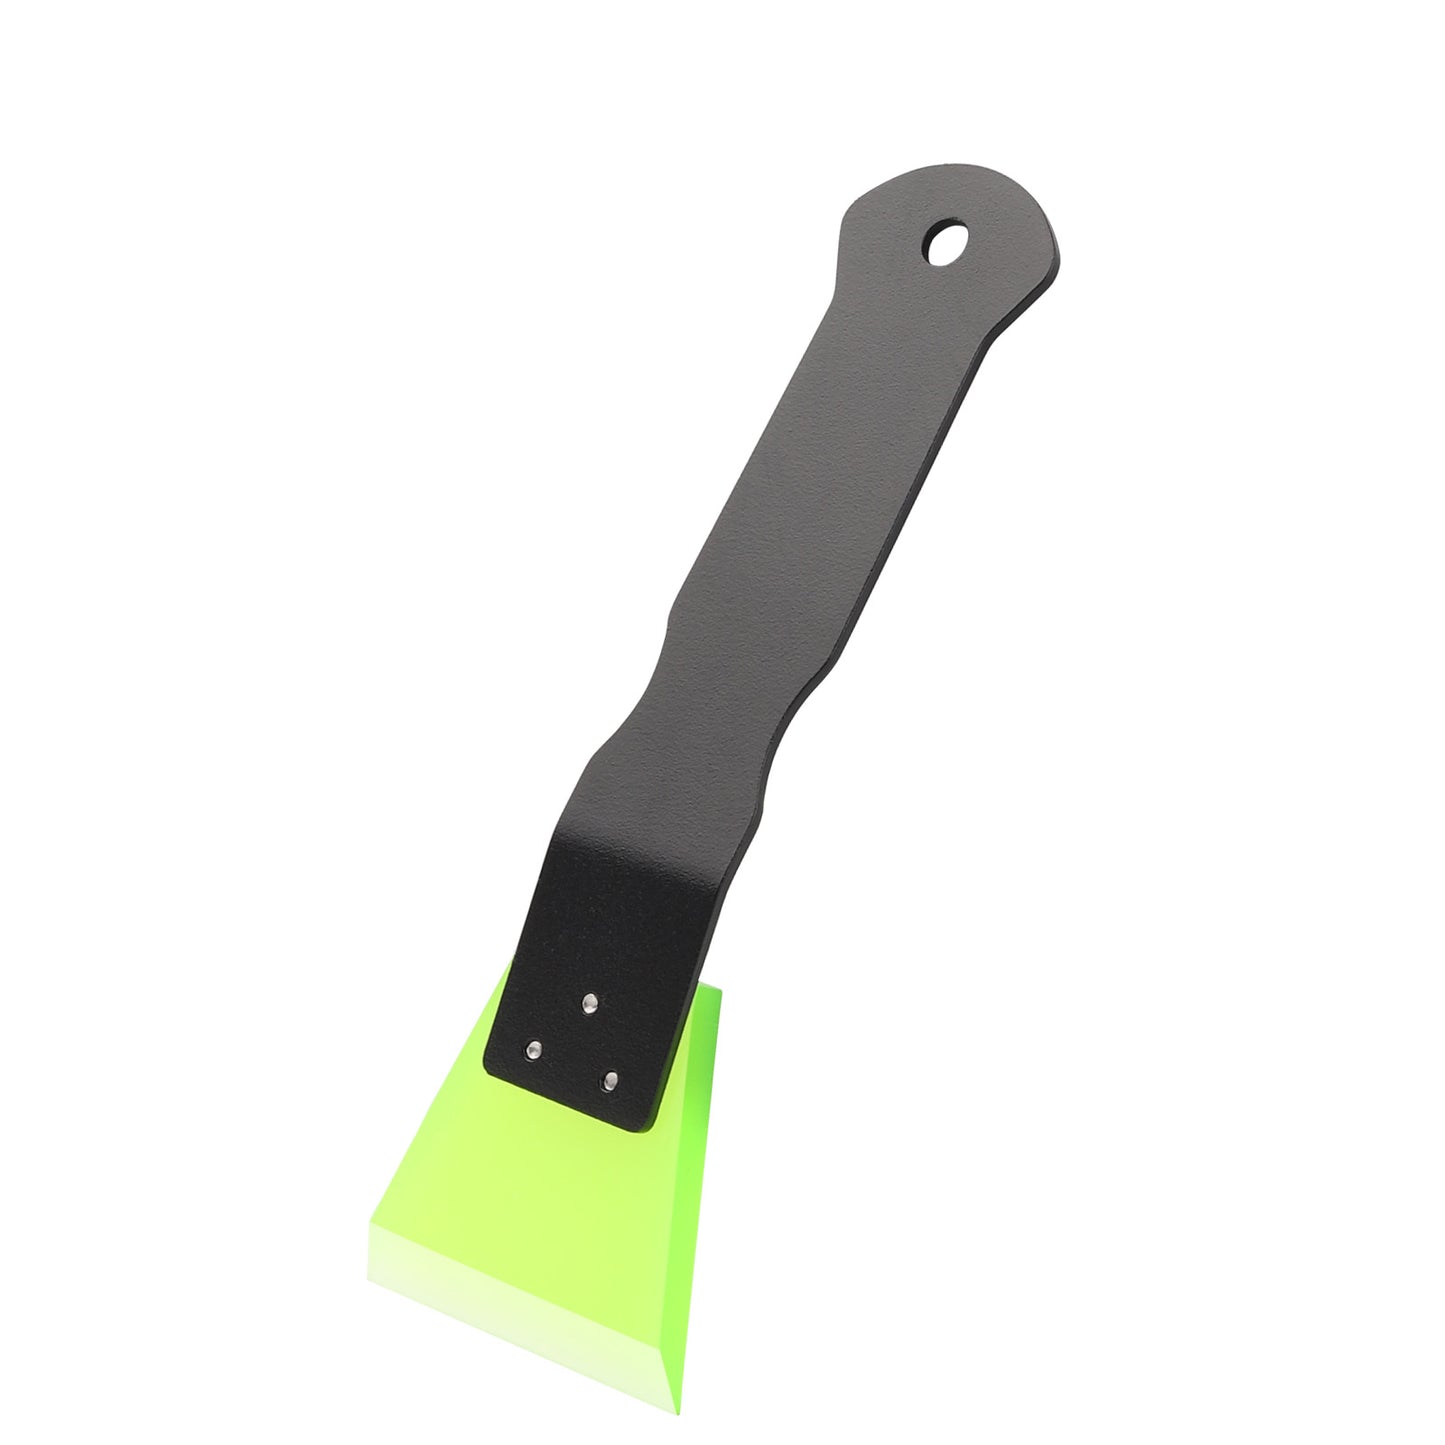 Metal Handle Quarter Windows Squeegee, the professional's choice for precise window tinting.